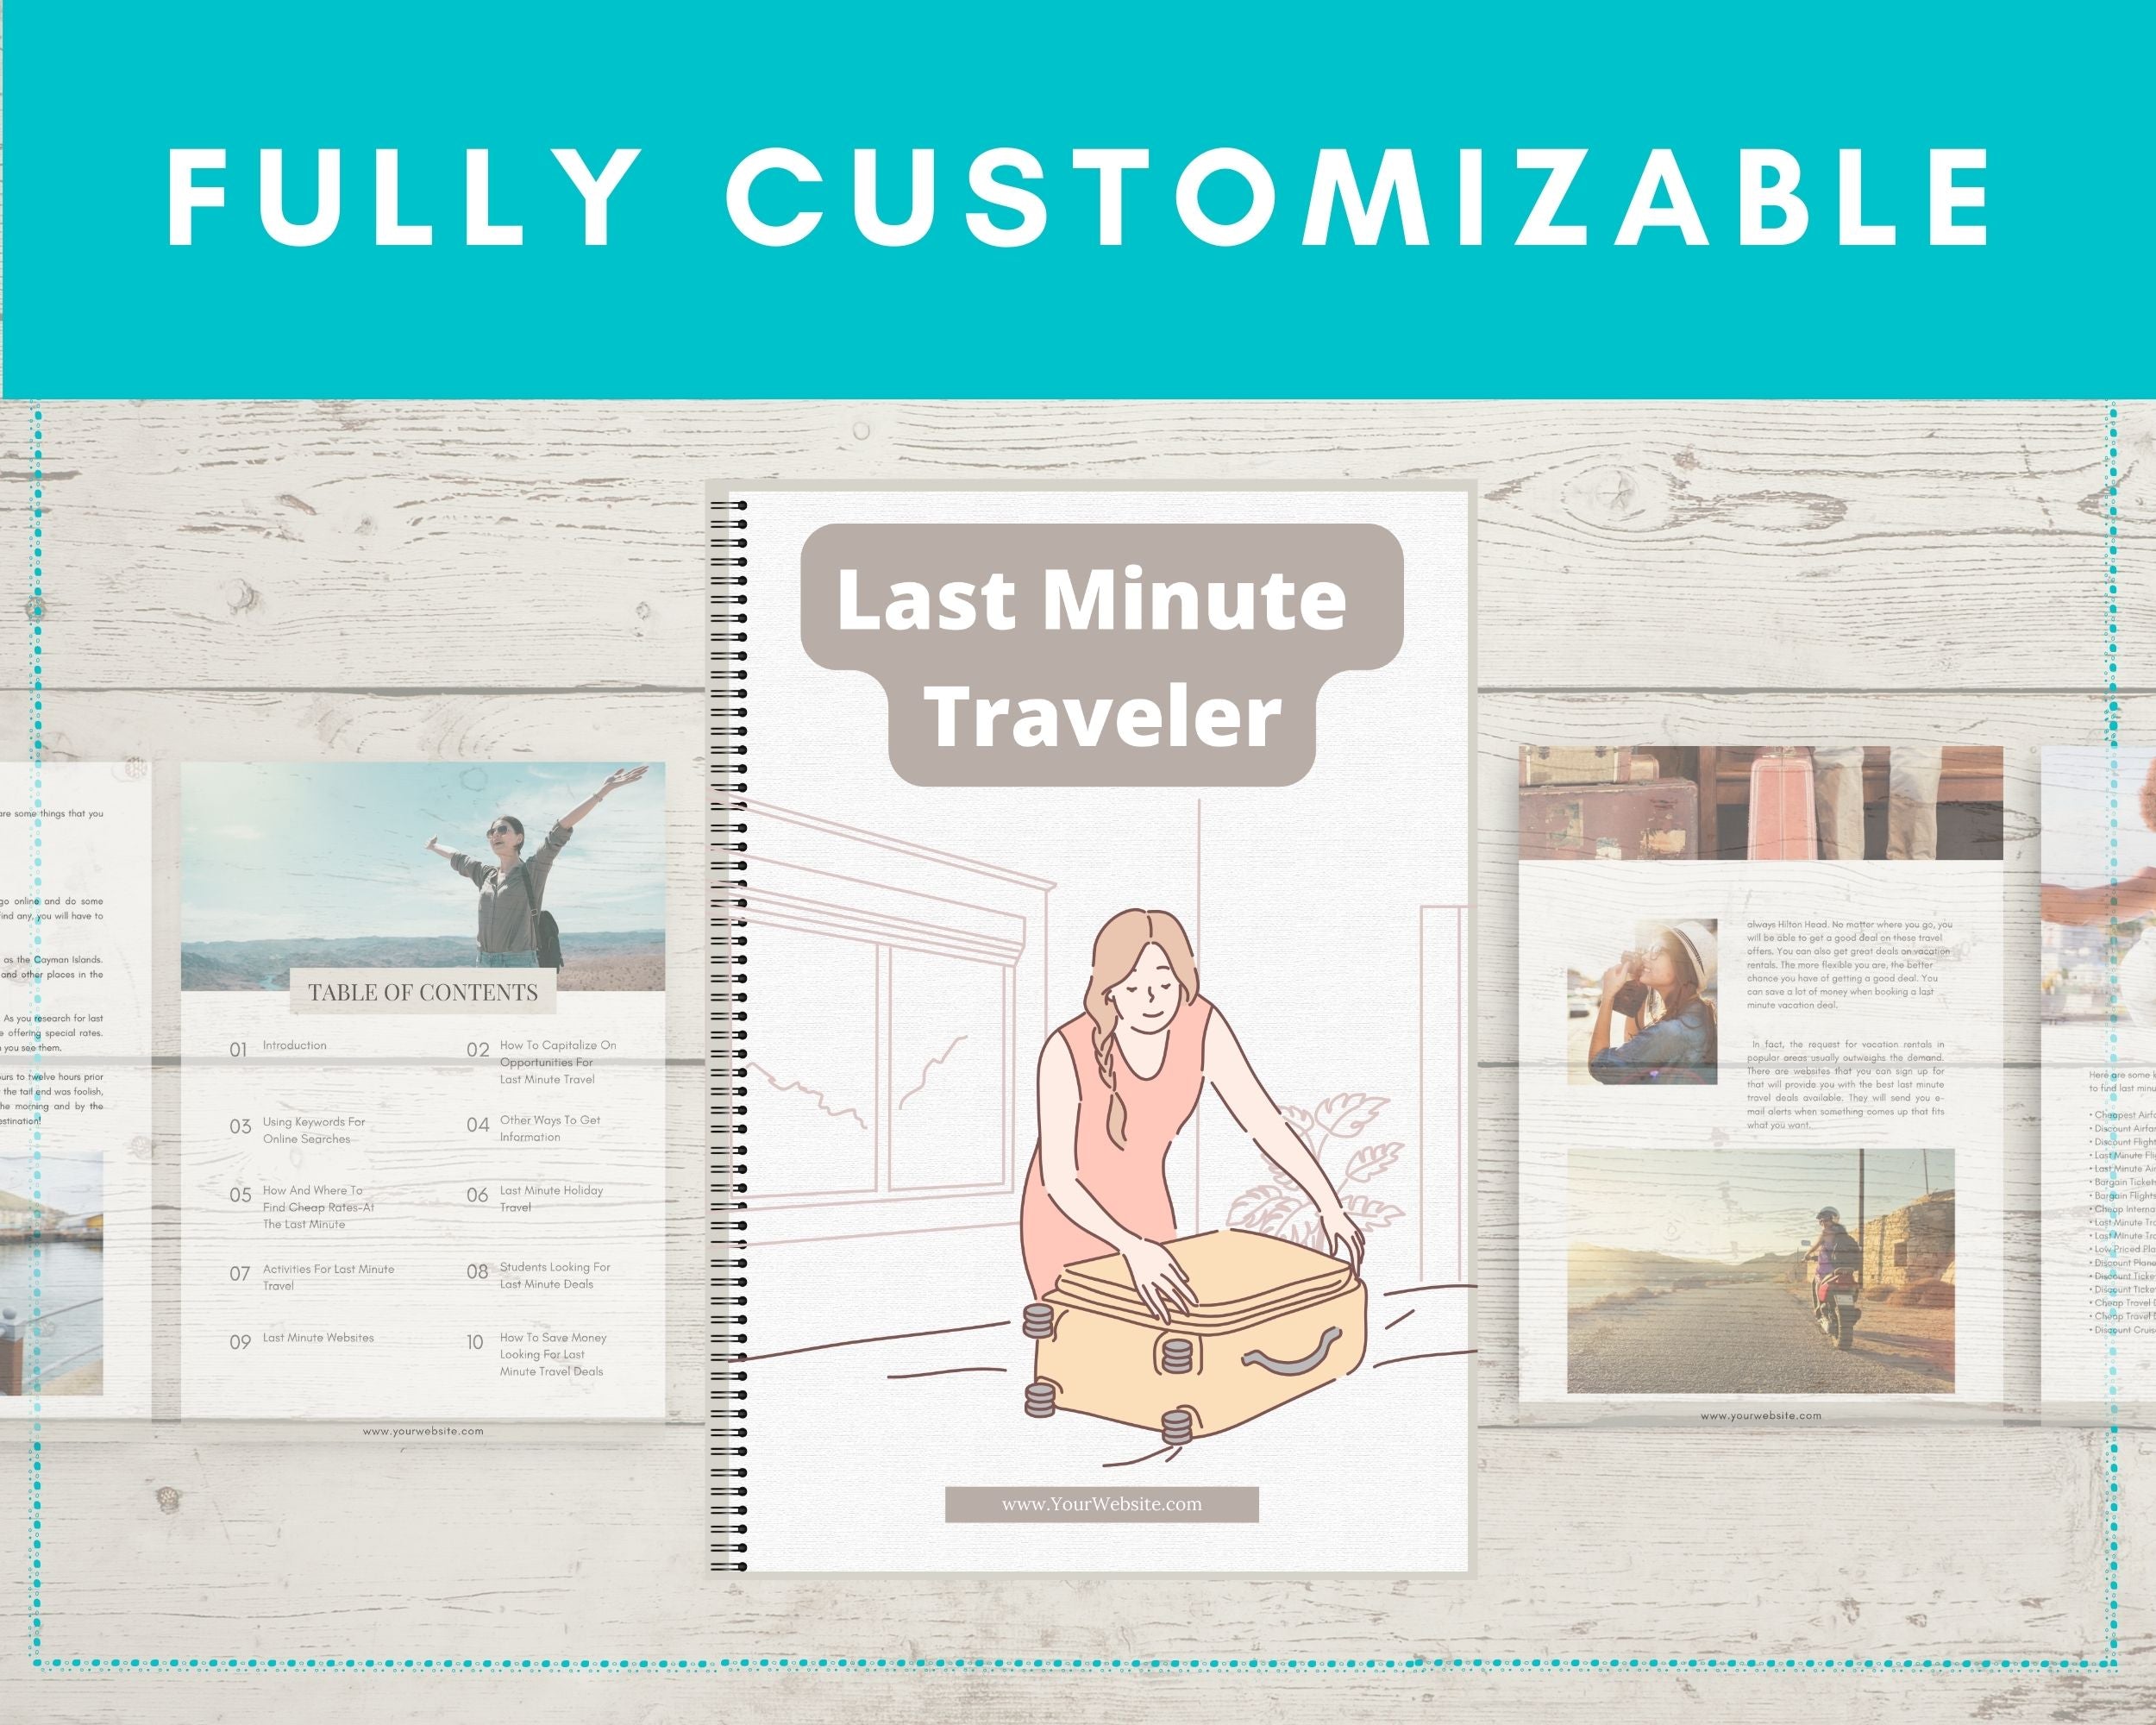 Editable Last Minute Traveler Ebook in Canva | Rebrandable and Resizable Canva Template